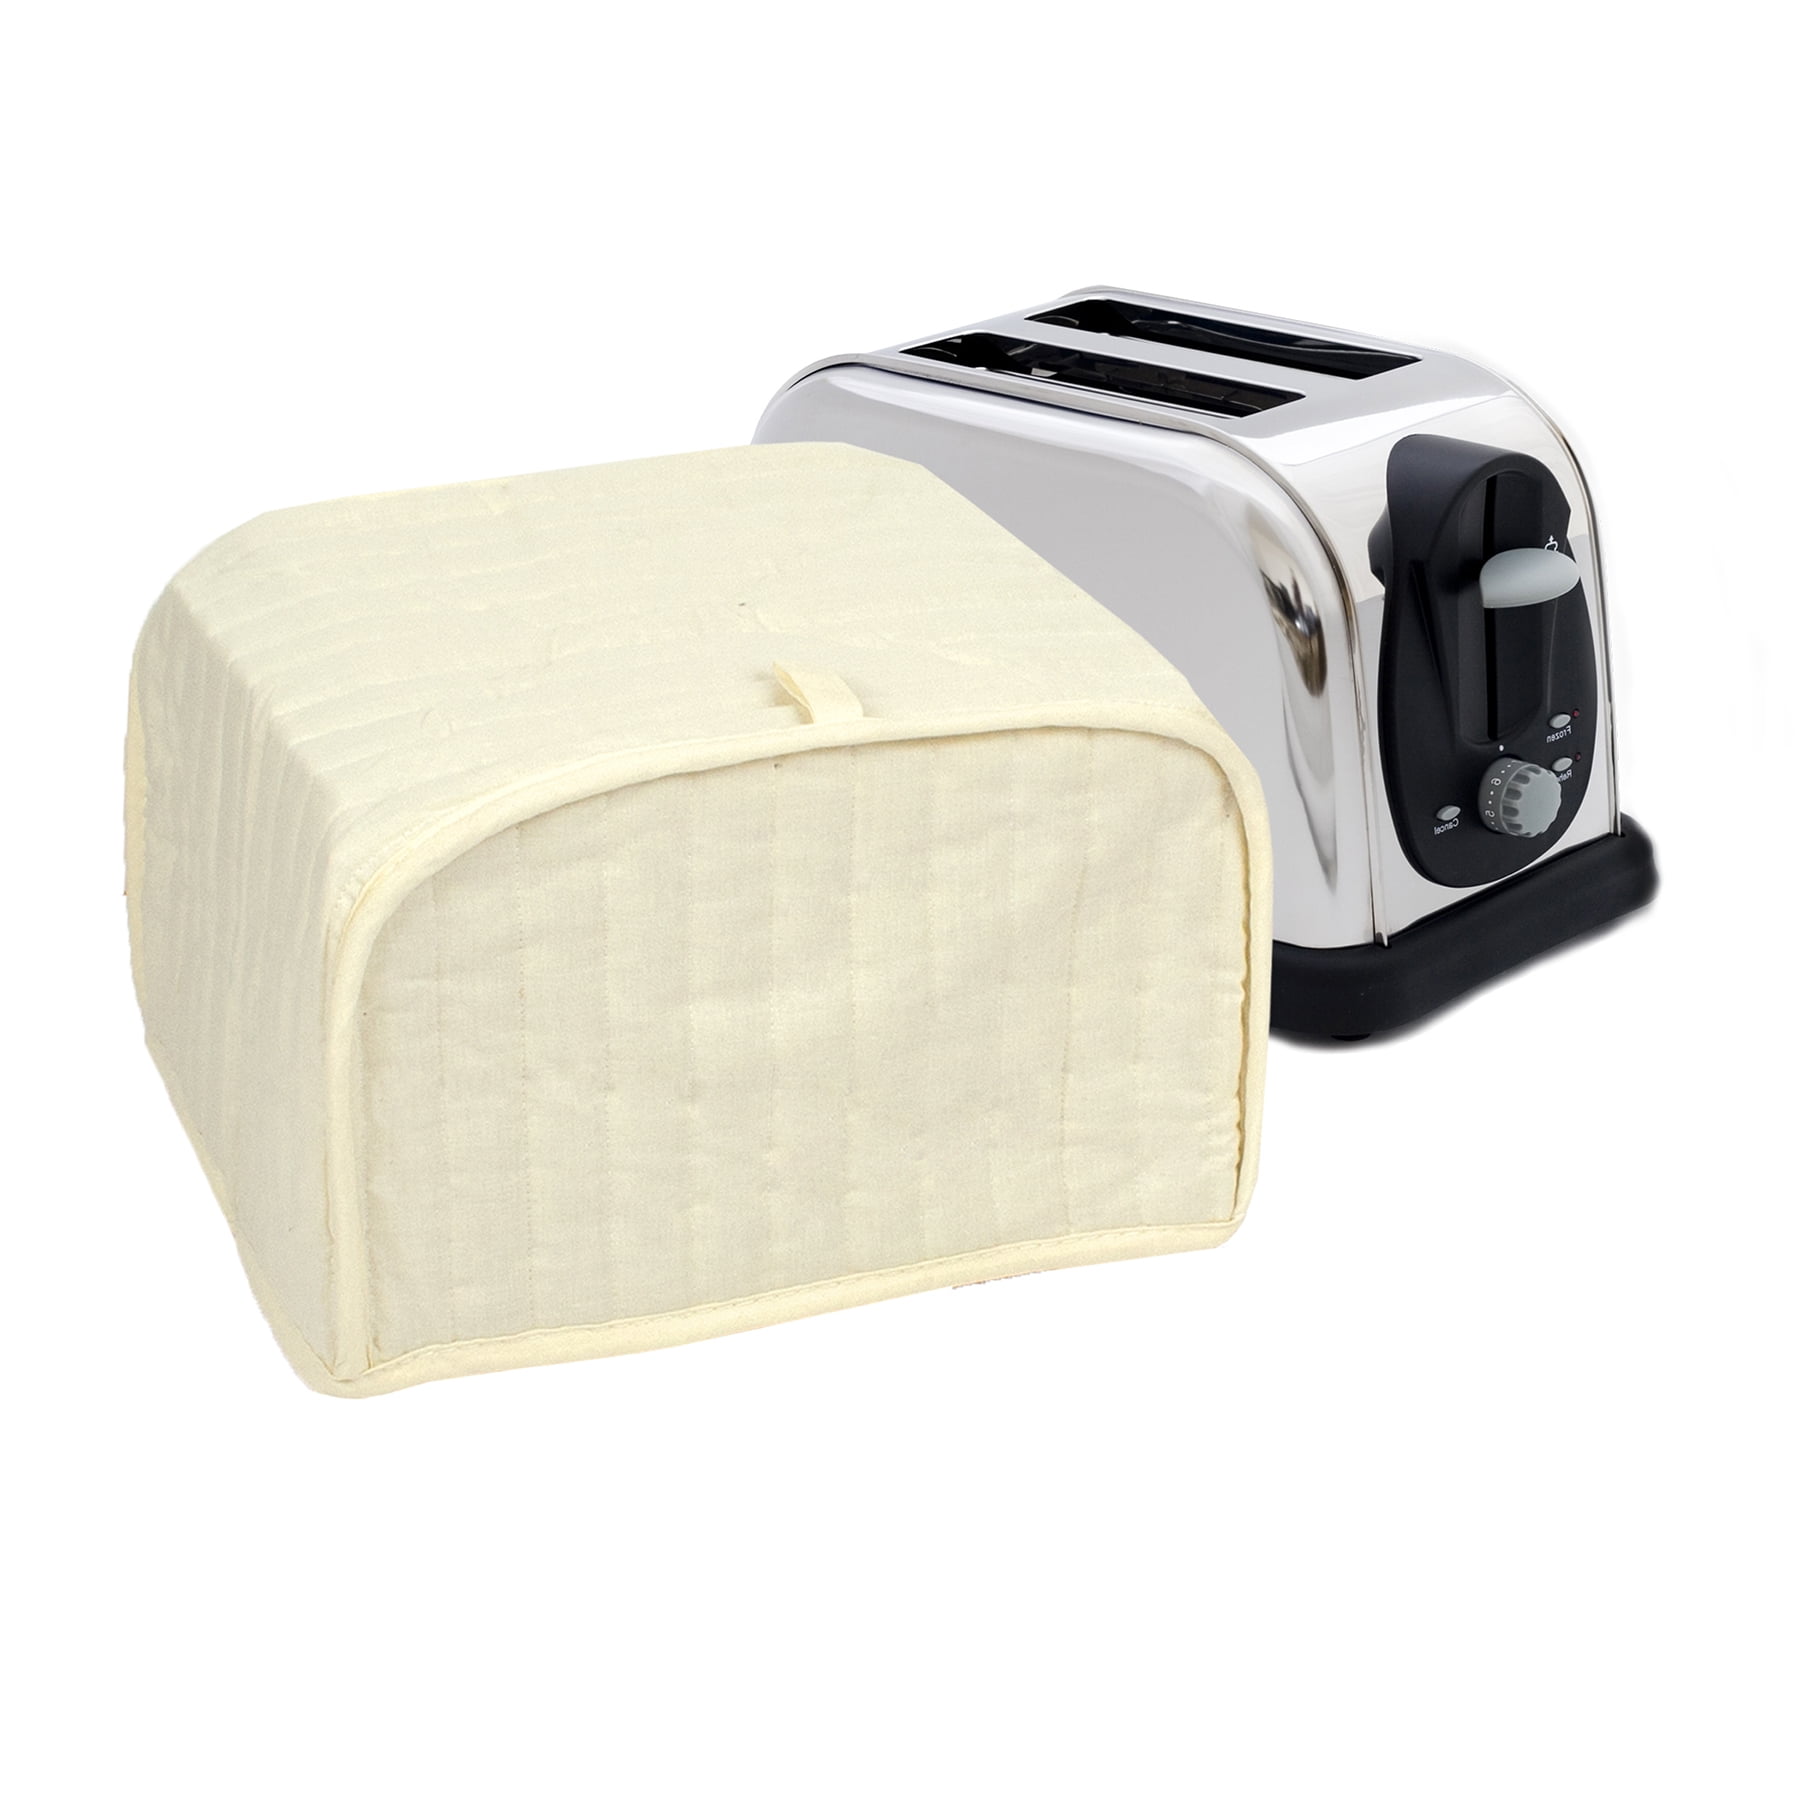 Luxja iSH09-M423887mn 2 Slice Toaster Cover (11 x 7.5 x 8 inches